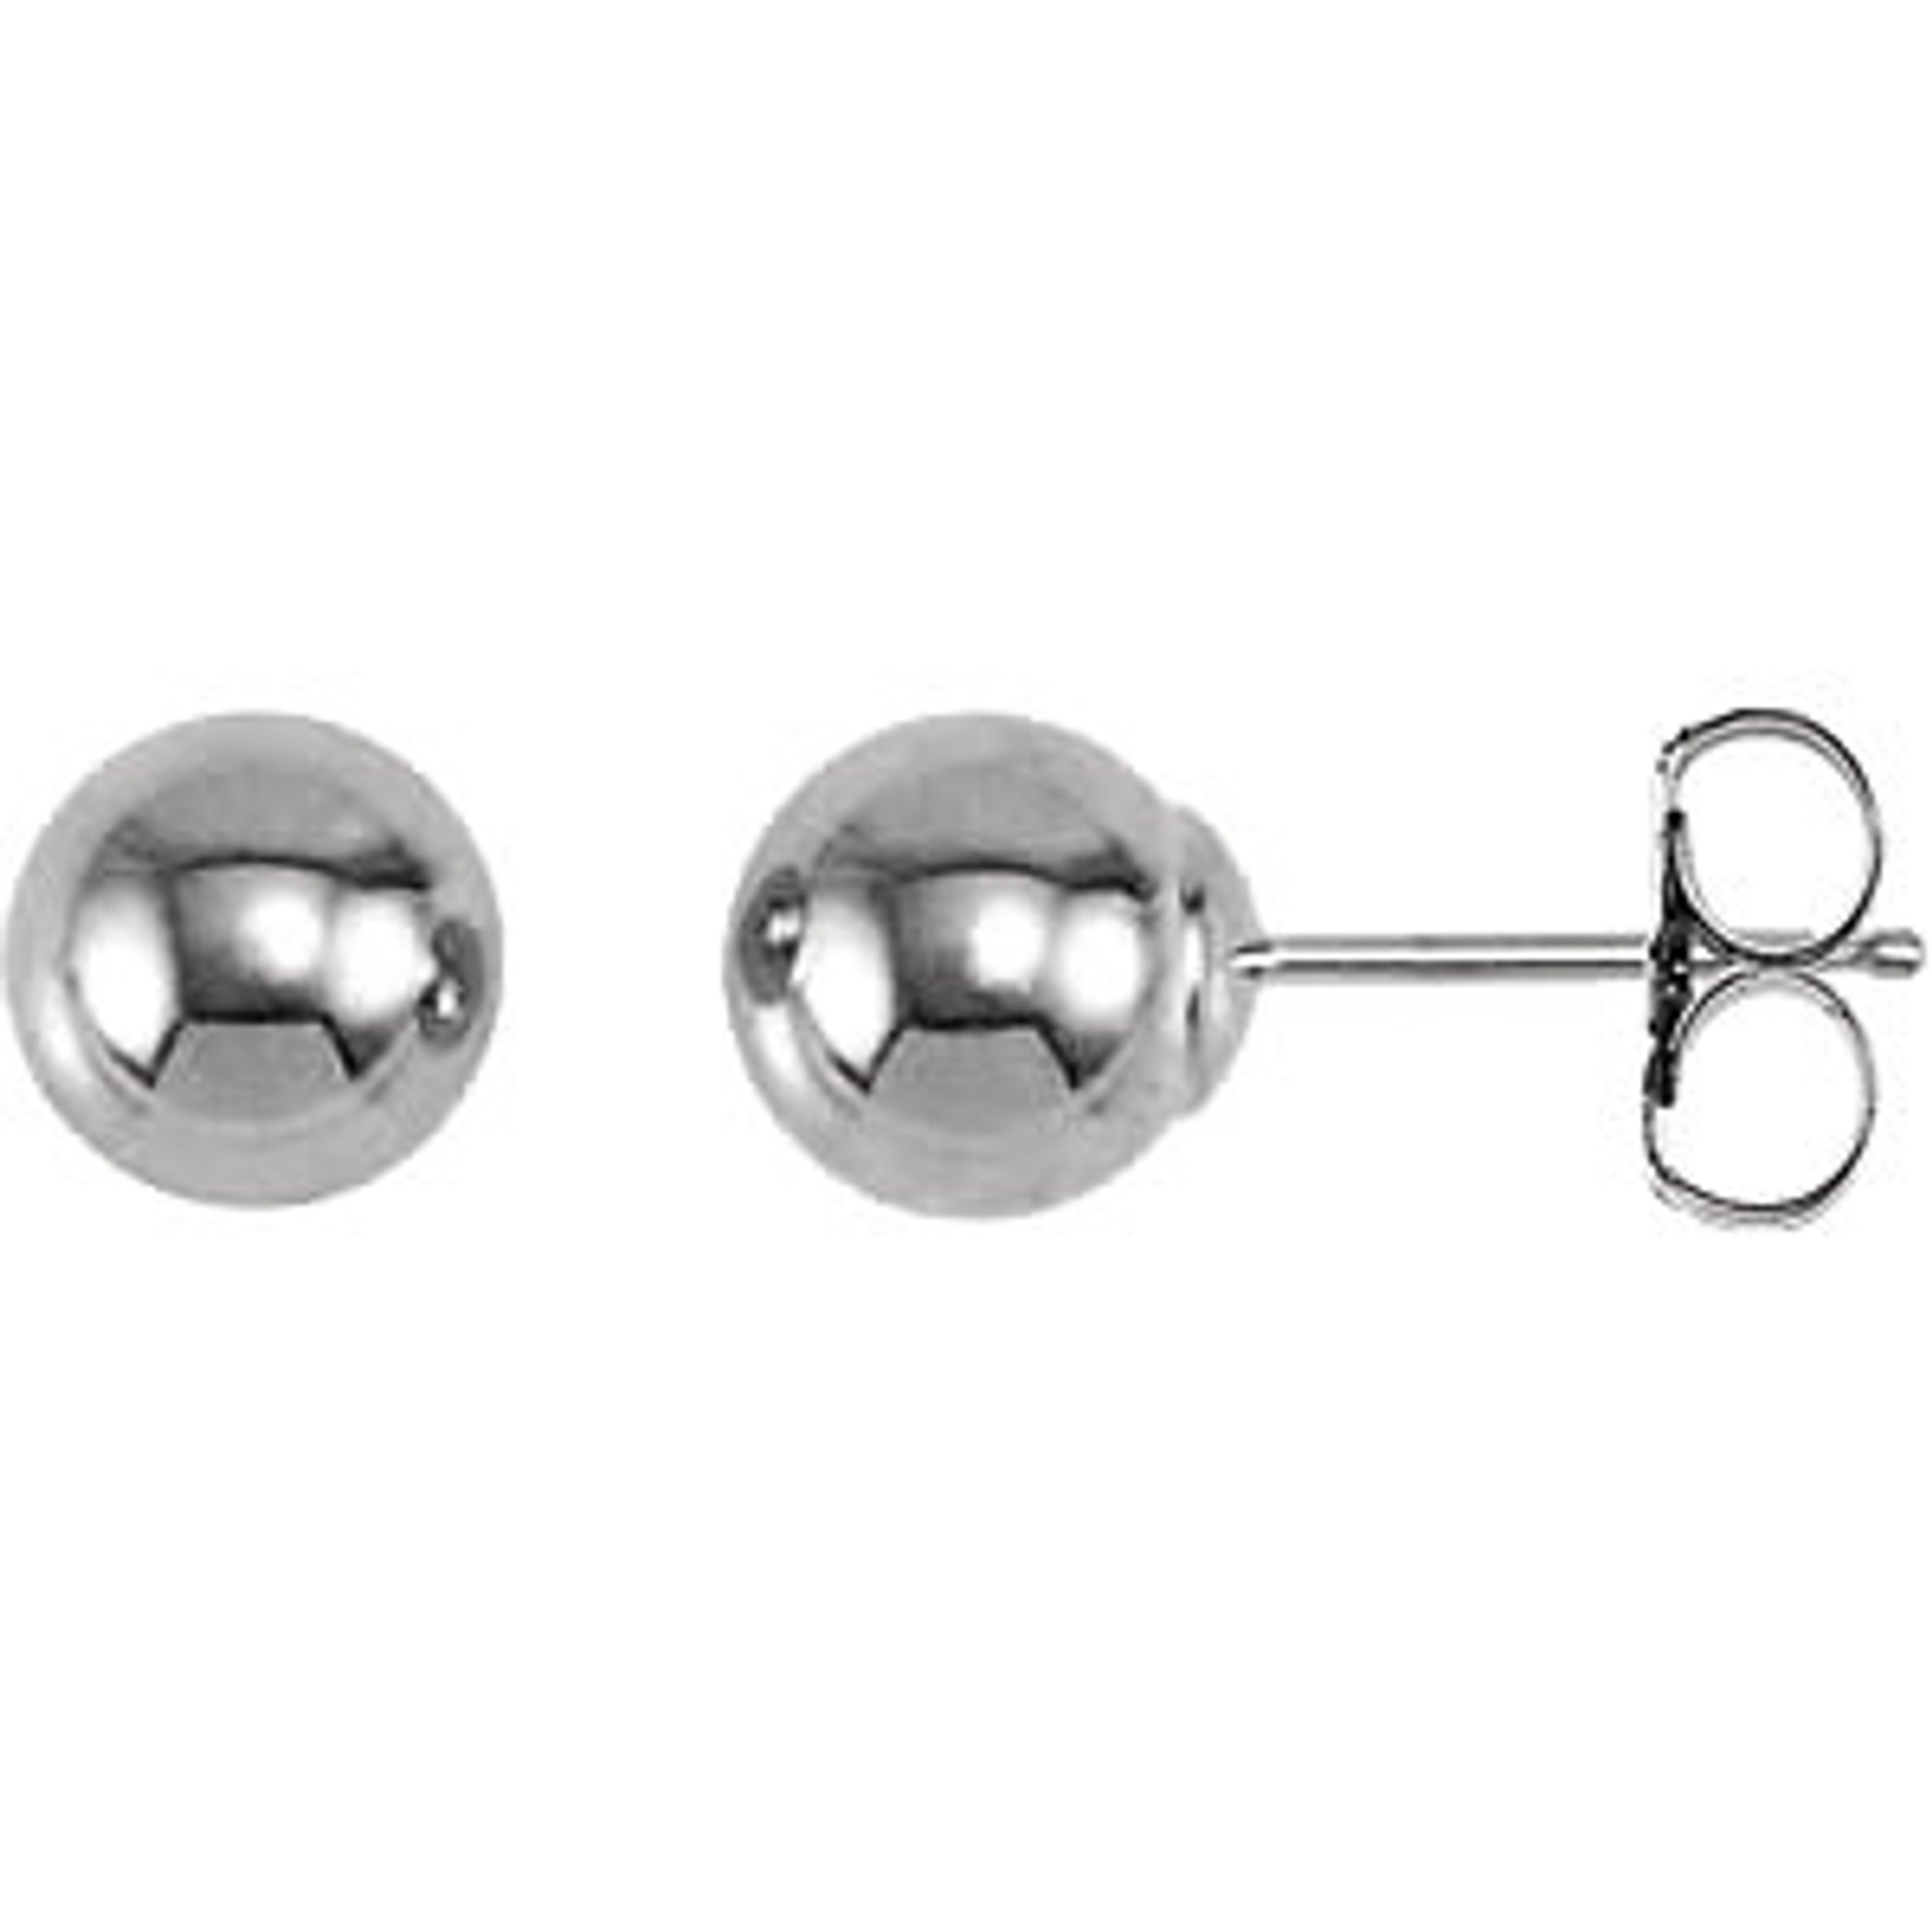 14kt White Gold 6mm Ball Earrings with Bright Finish | Sarraf.com